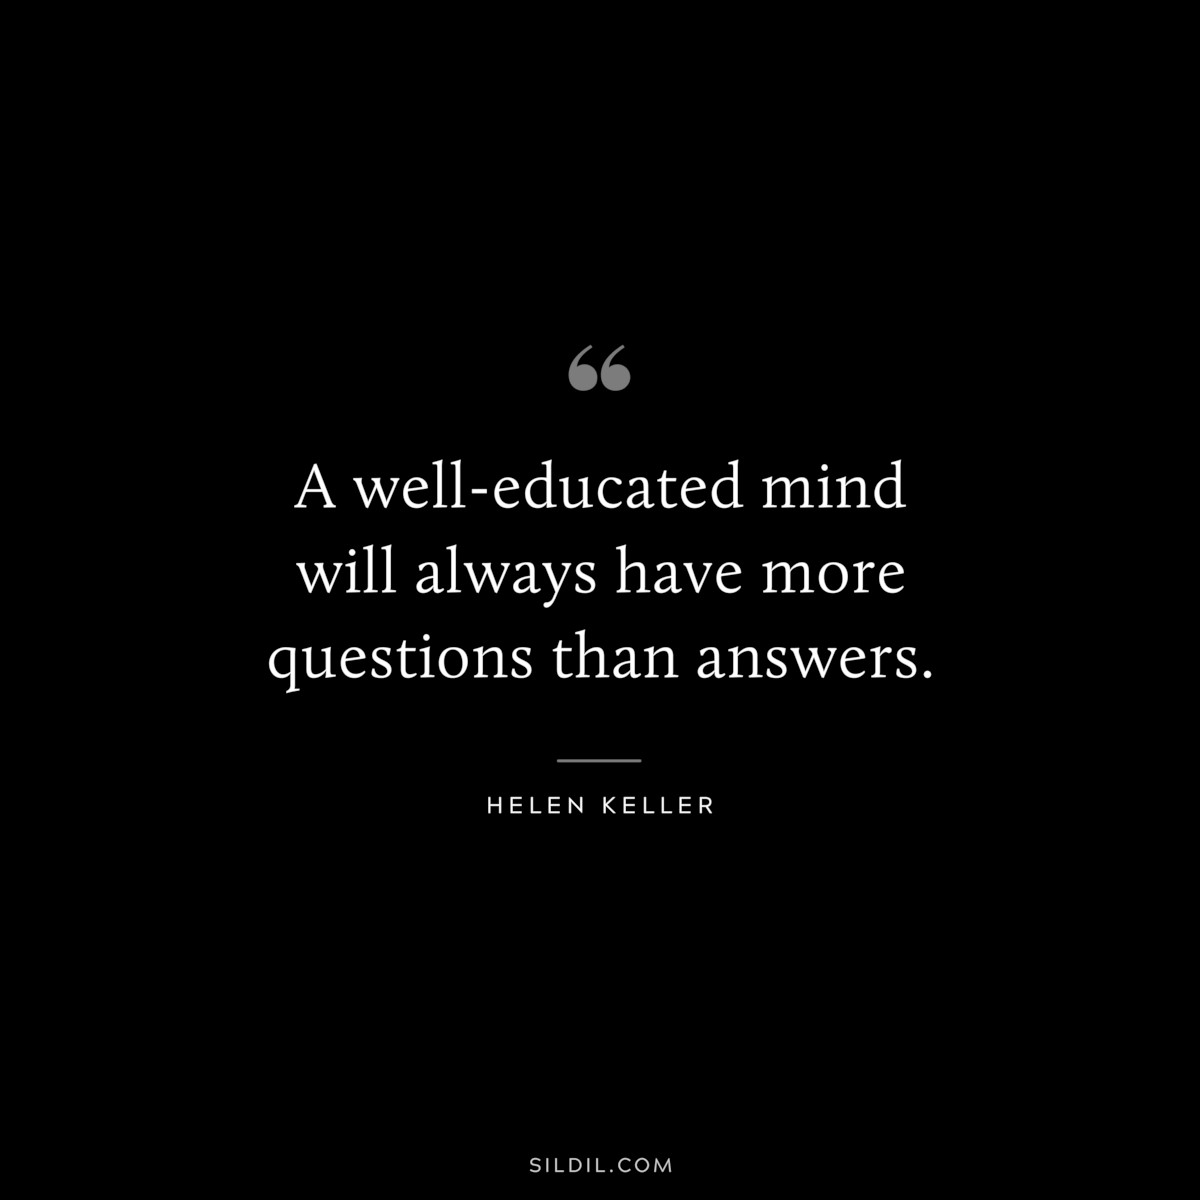 A well-educated mind will always have more questions than answers. ― Helen Keller